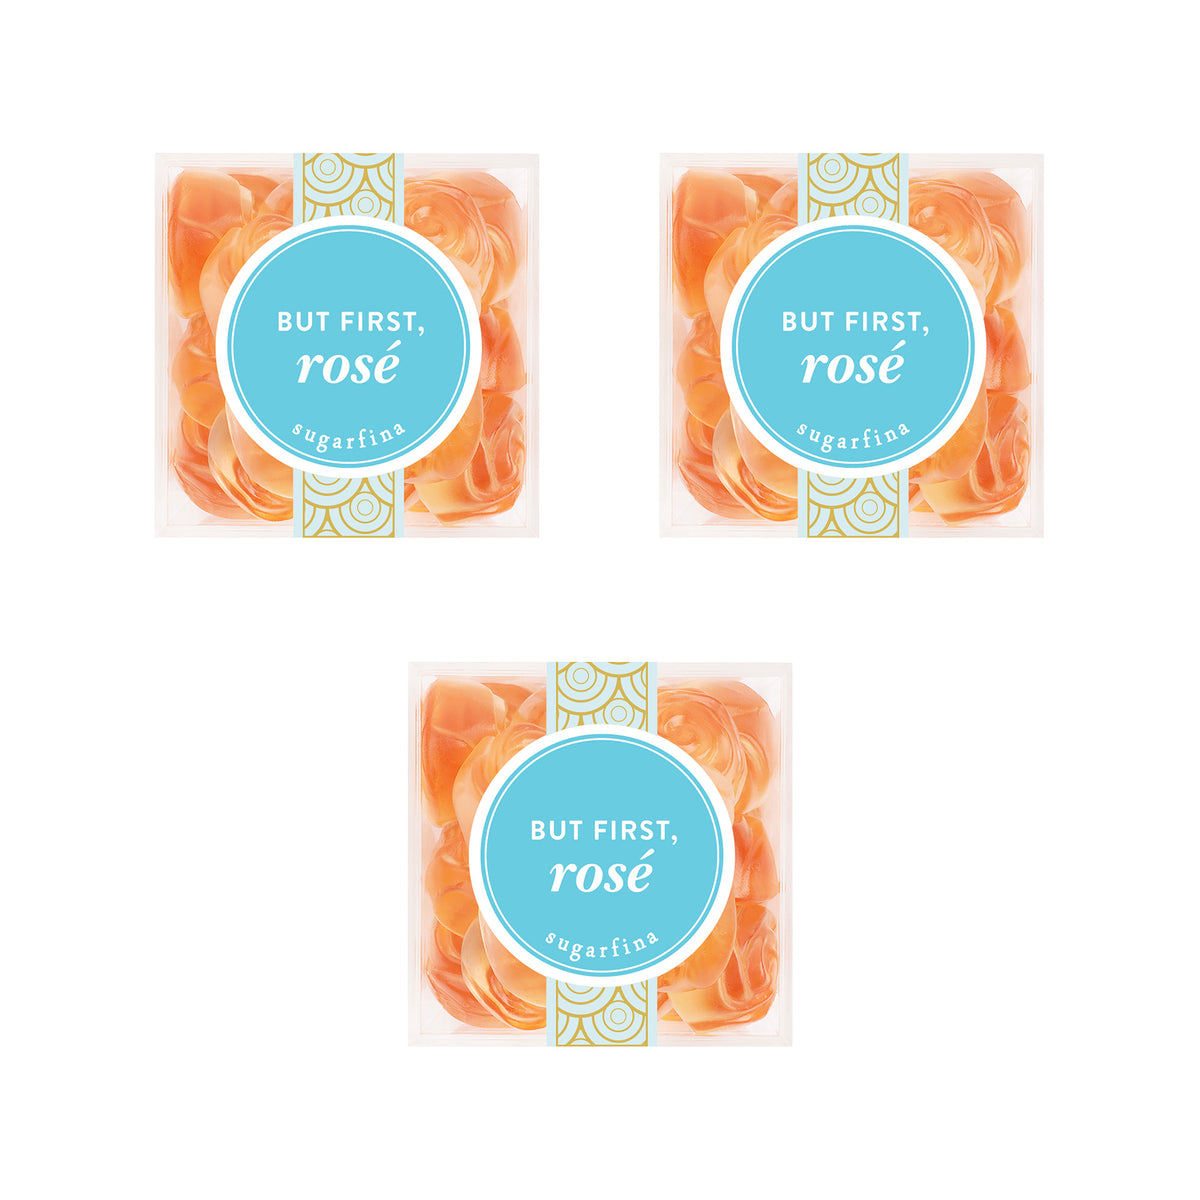 But First, Rose Small Cube Kit, Pack of 3